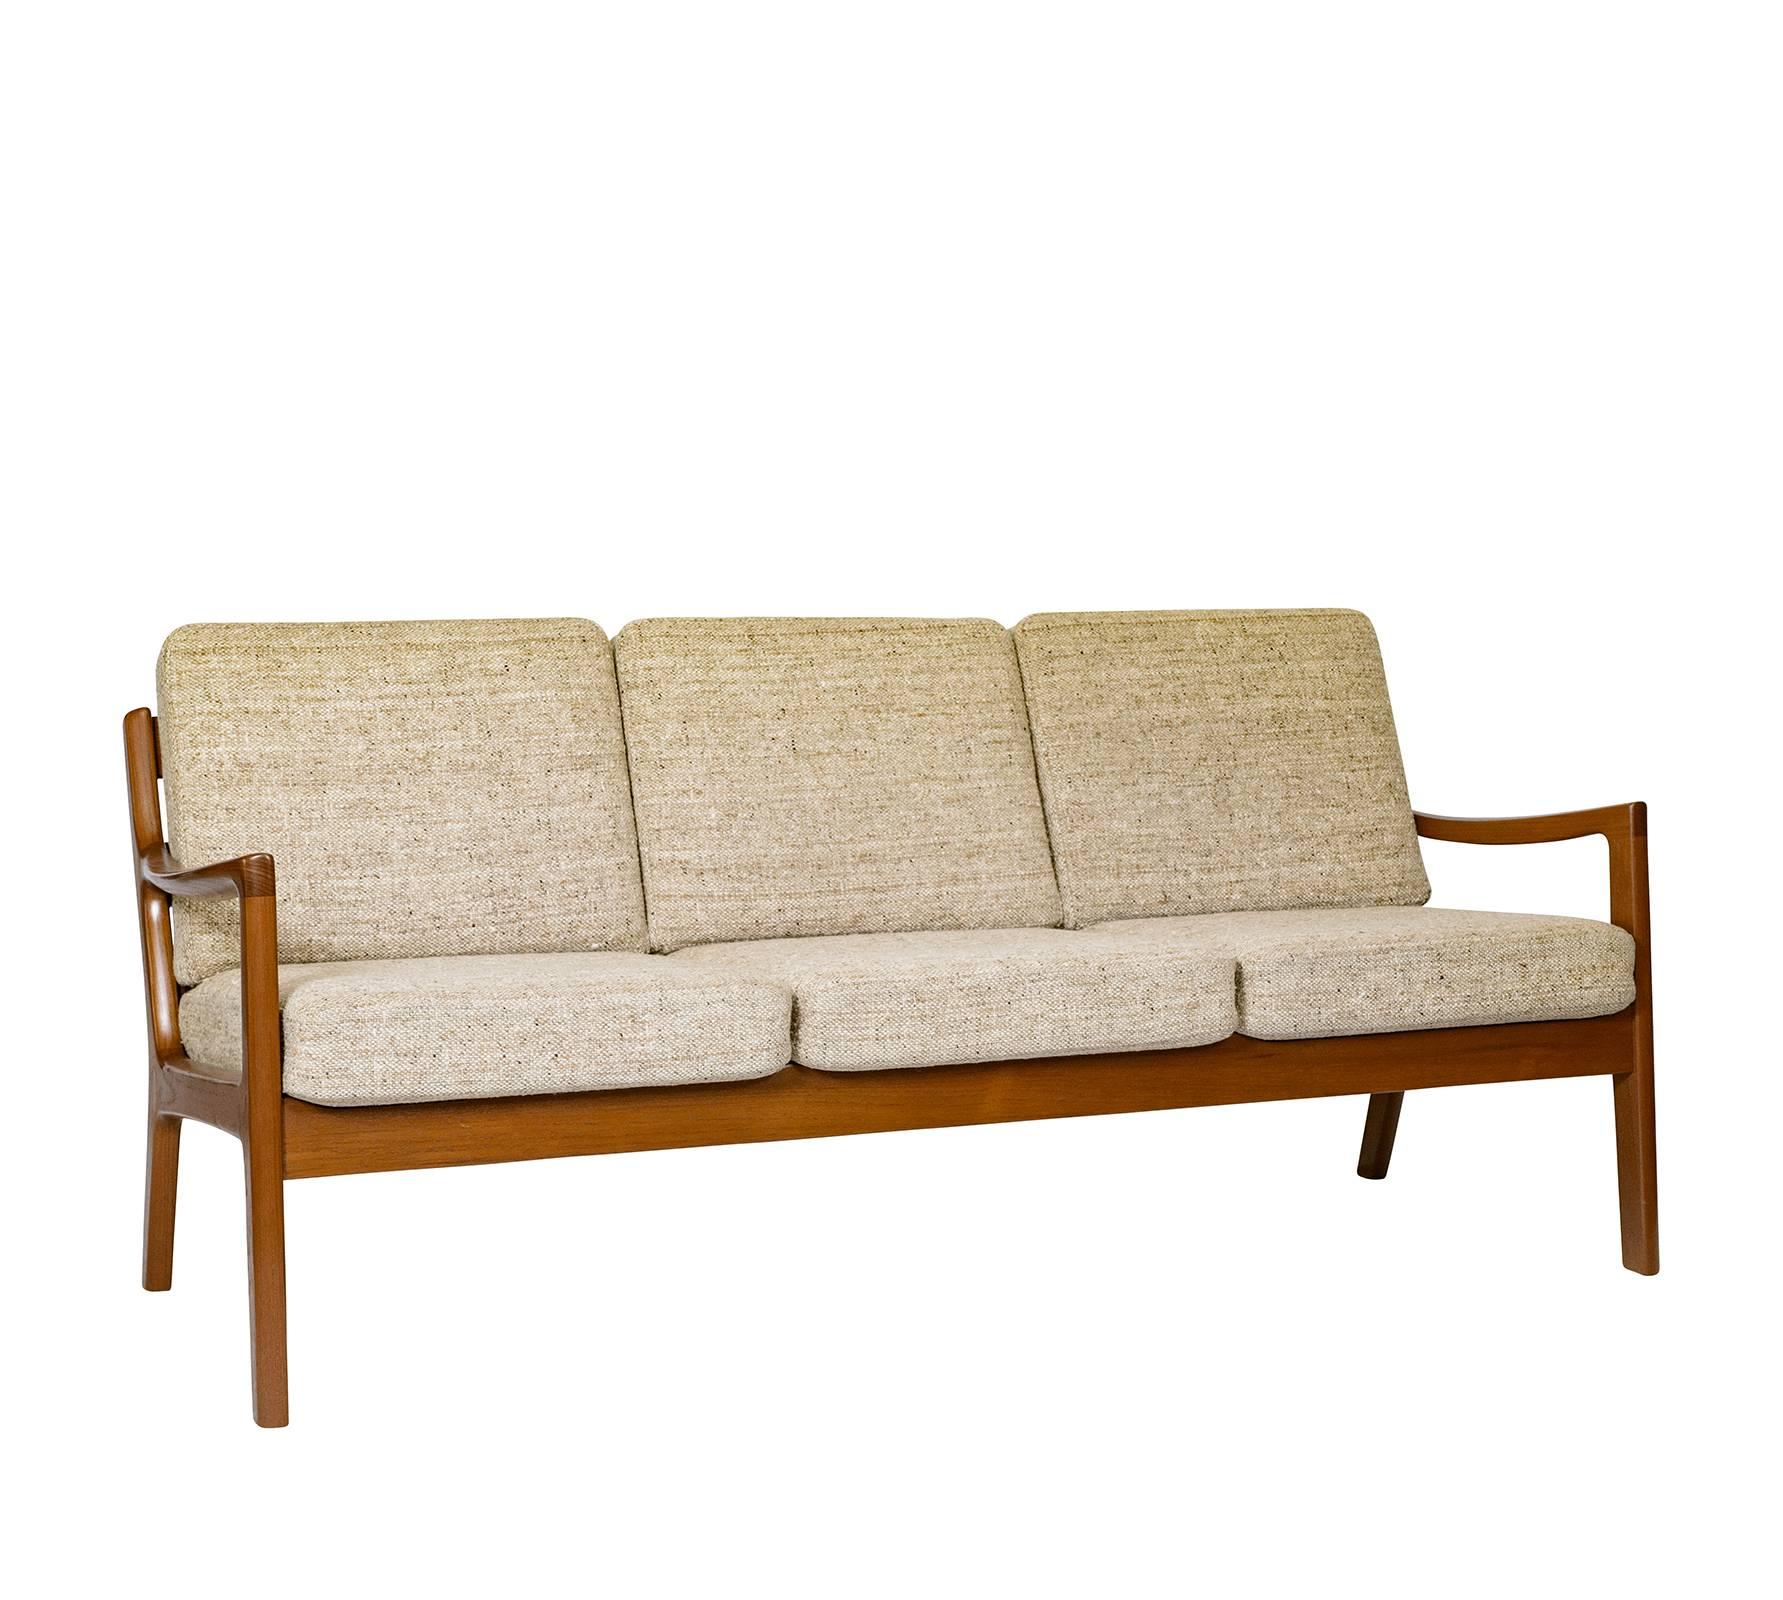 Ole Wanscher sofa designed in 1962 and produced by France & Son.